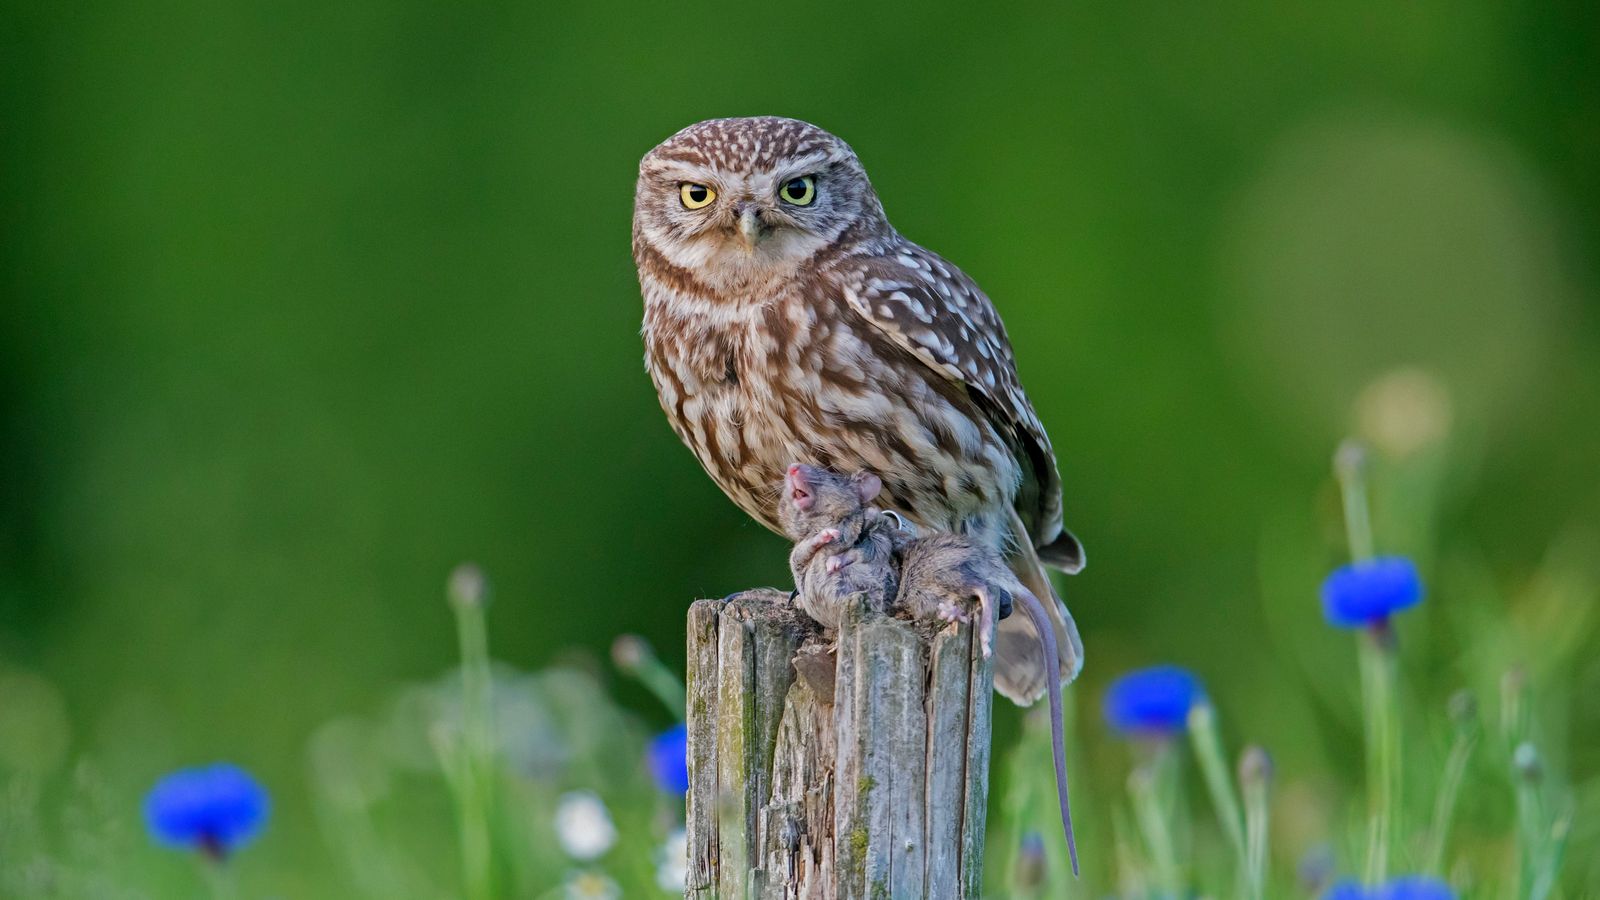 DNA from animals such as little owls was found on the air pollution filters in the UK (Credit: Sven-Erik Arndt / Getty Images)